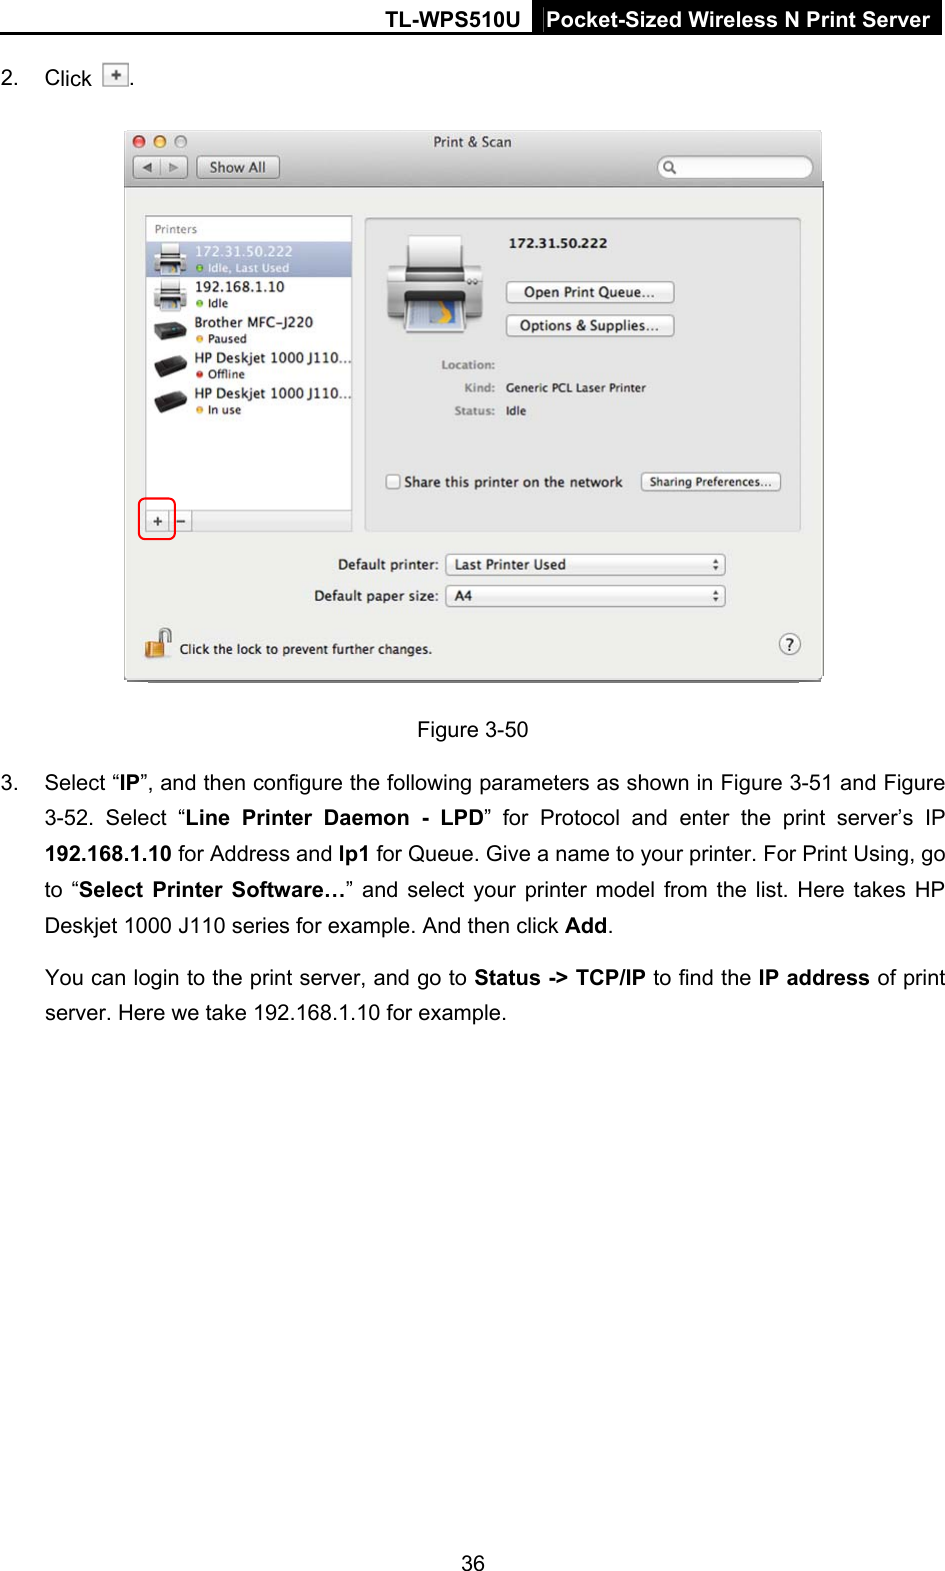 TL-WPS510U Pocket-Sized Wireless N Print Server 2. Click  .  Figure 3-50 3. Select “IP”, and then configure the following parameters as shown in Figure 3-51 and Figure 3-52. Select “Line Printer Daemon - LPD” for Protocol and enter the print server’s IP 192.168.1.10 for Address and lp1 for Queue. Give a name to your printer. For Print Using, go to “Select Printer Software…” and select your printer model from the list. Here takes HP Deskjet 1000 J110 series for example. And then click Add. You can login to the print server, and go to Status -&gt; TCP/IP to find the IP address of print server. Here we take 192.168.1.10 for example. 36 